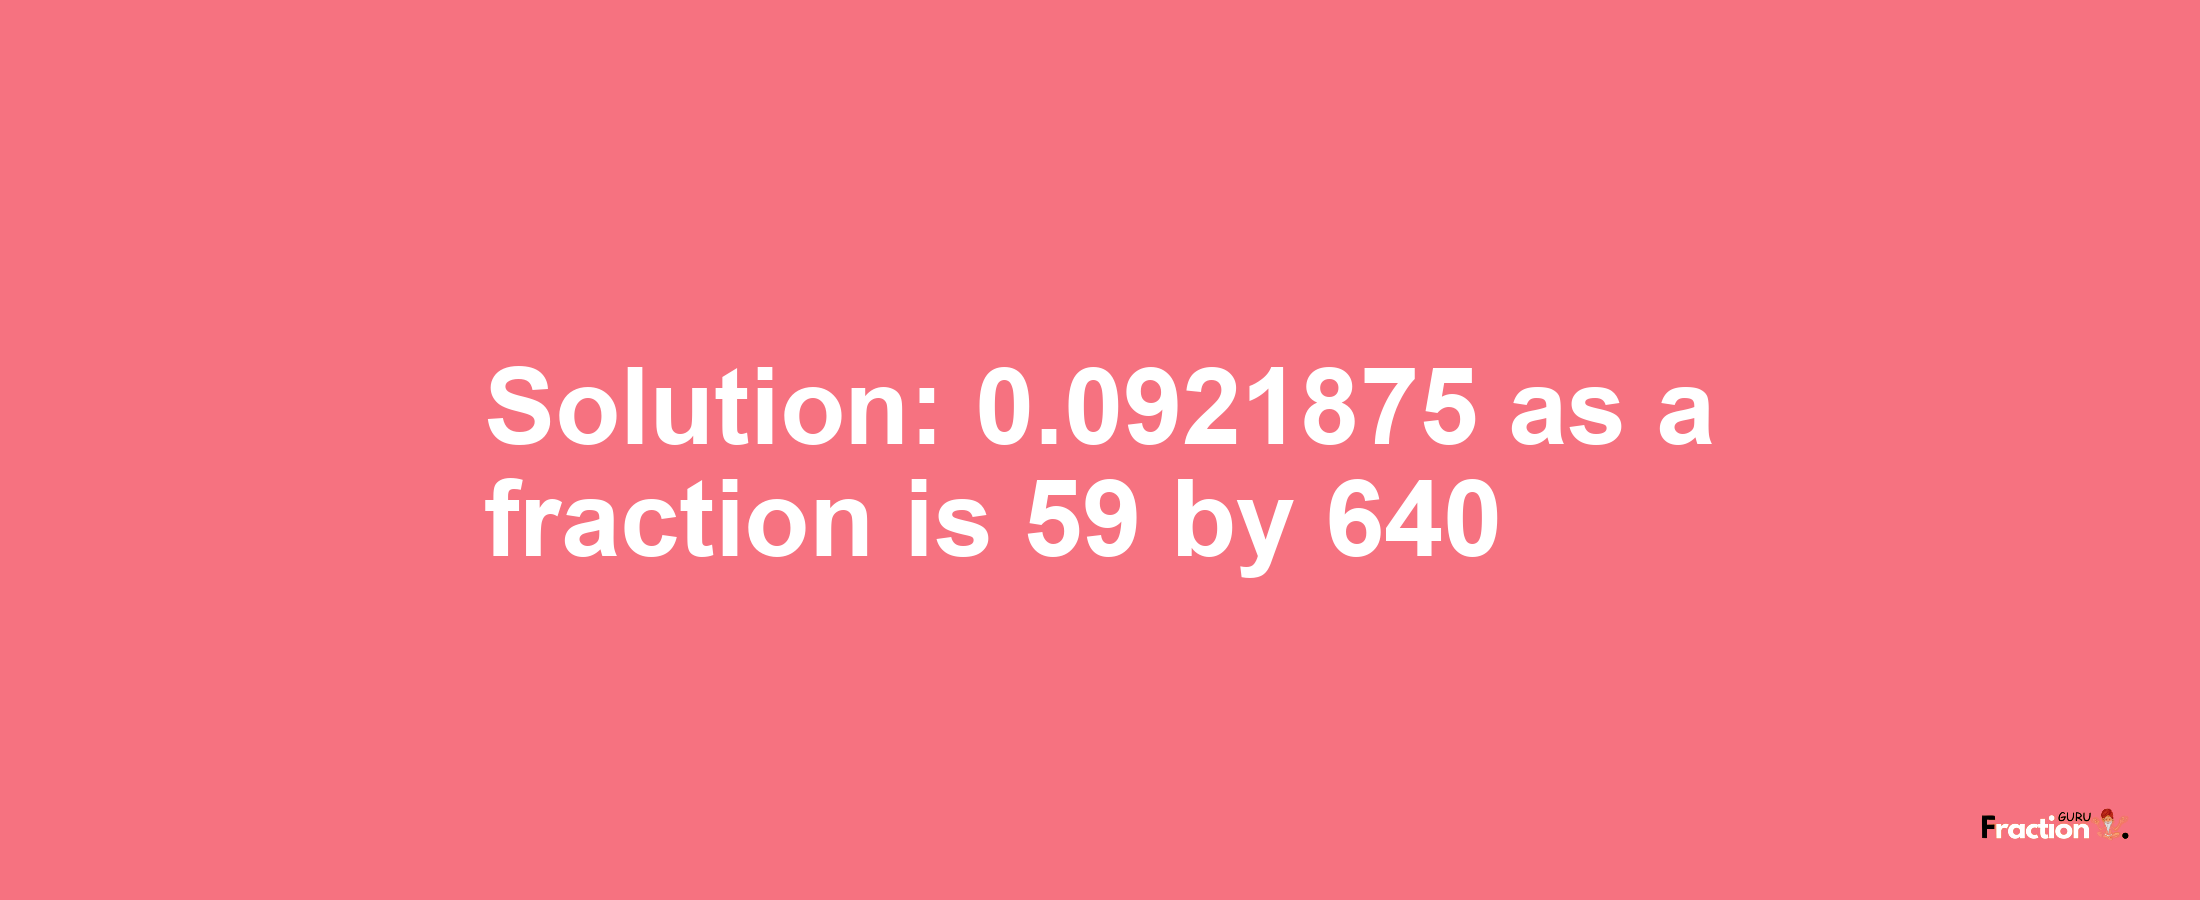 Solution:0.0921875 as a fraction is 59/640